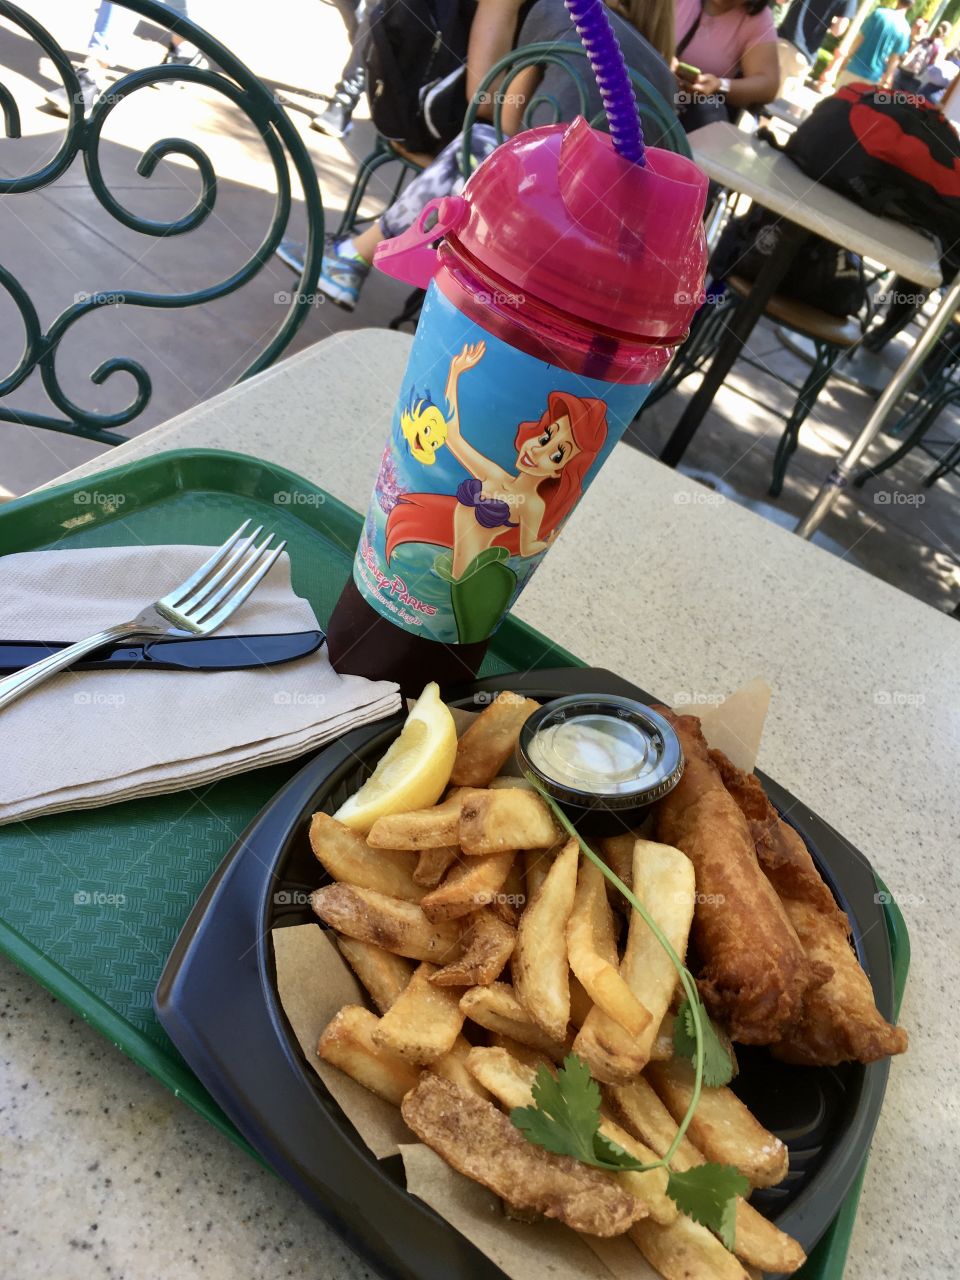 Ariel cup, fish and chips eating outside in Disney California Adventure.